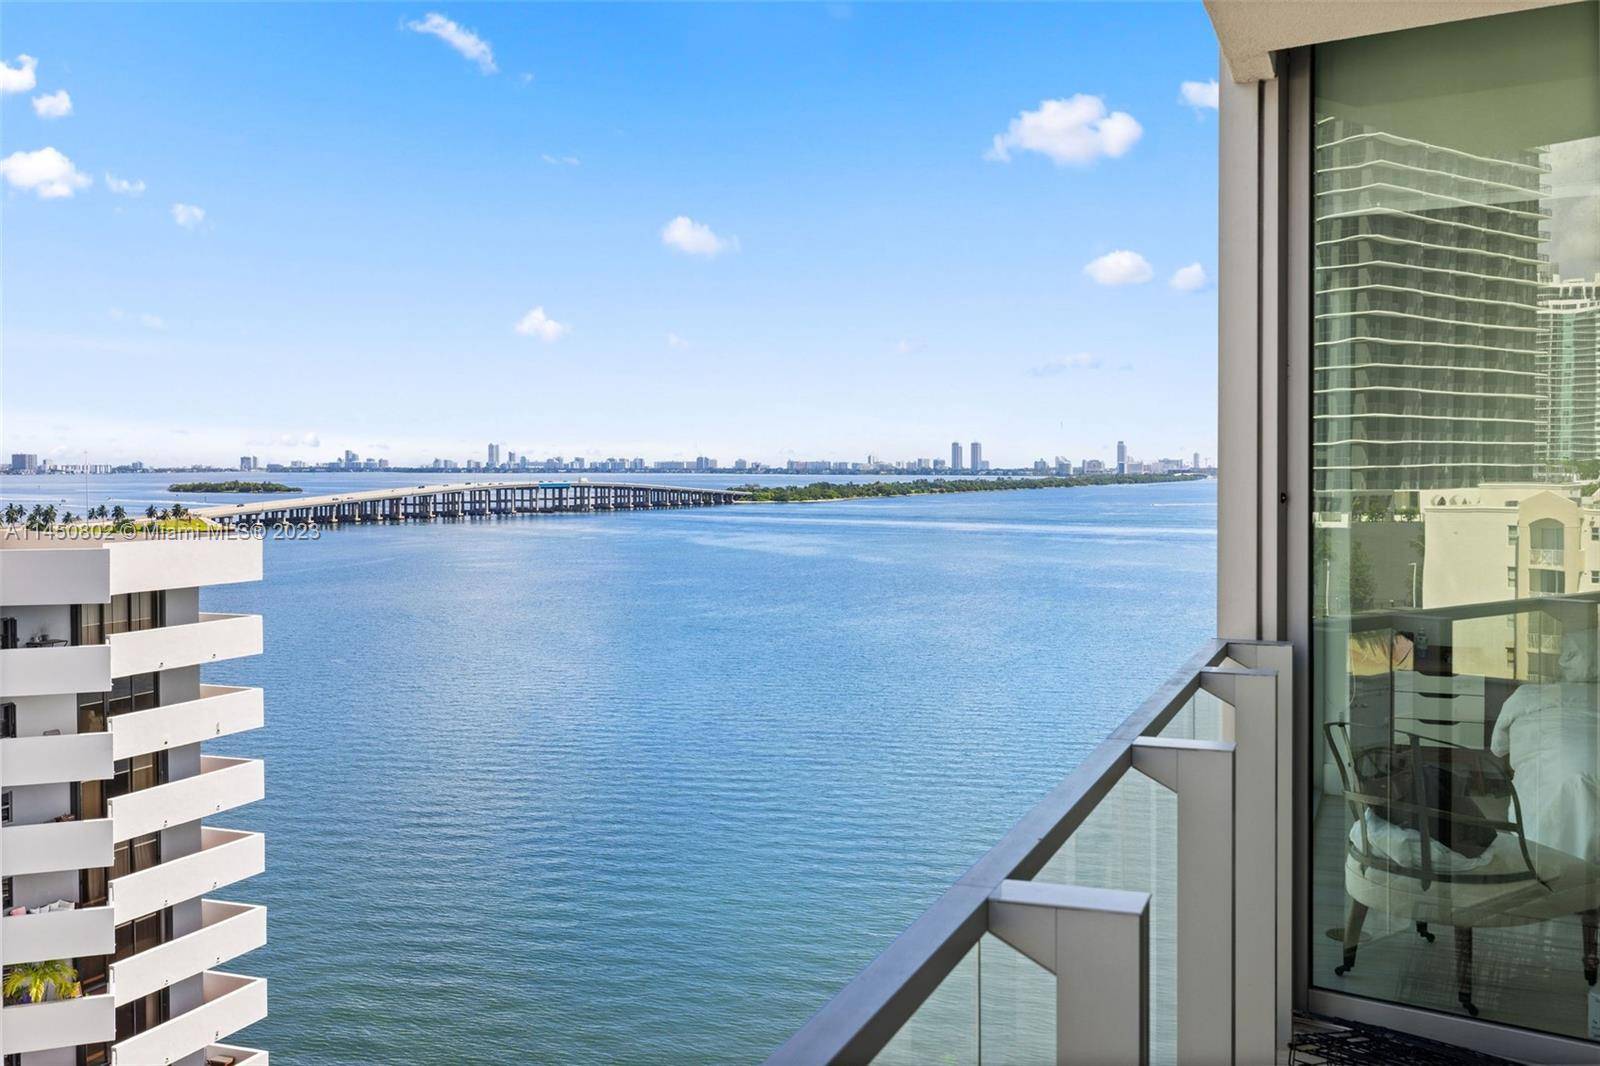 2 BEDROOM 2 BATH UNIT WITH 2 PARKING SPACES AND PRIVATE ELEVATOR ENTRY AT PREMIERE RESORT STYLE LUXURY BUILDING BISCAYNE BEACH.